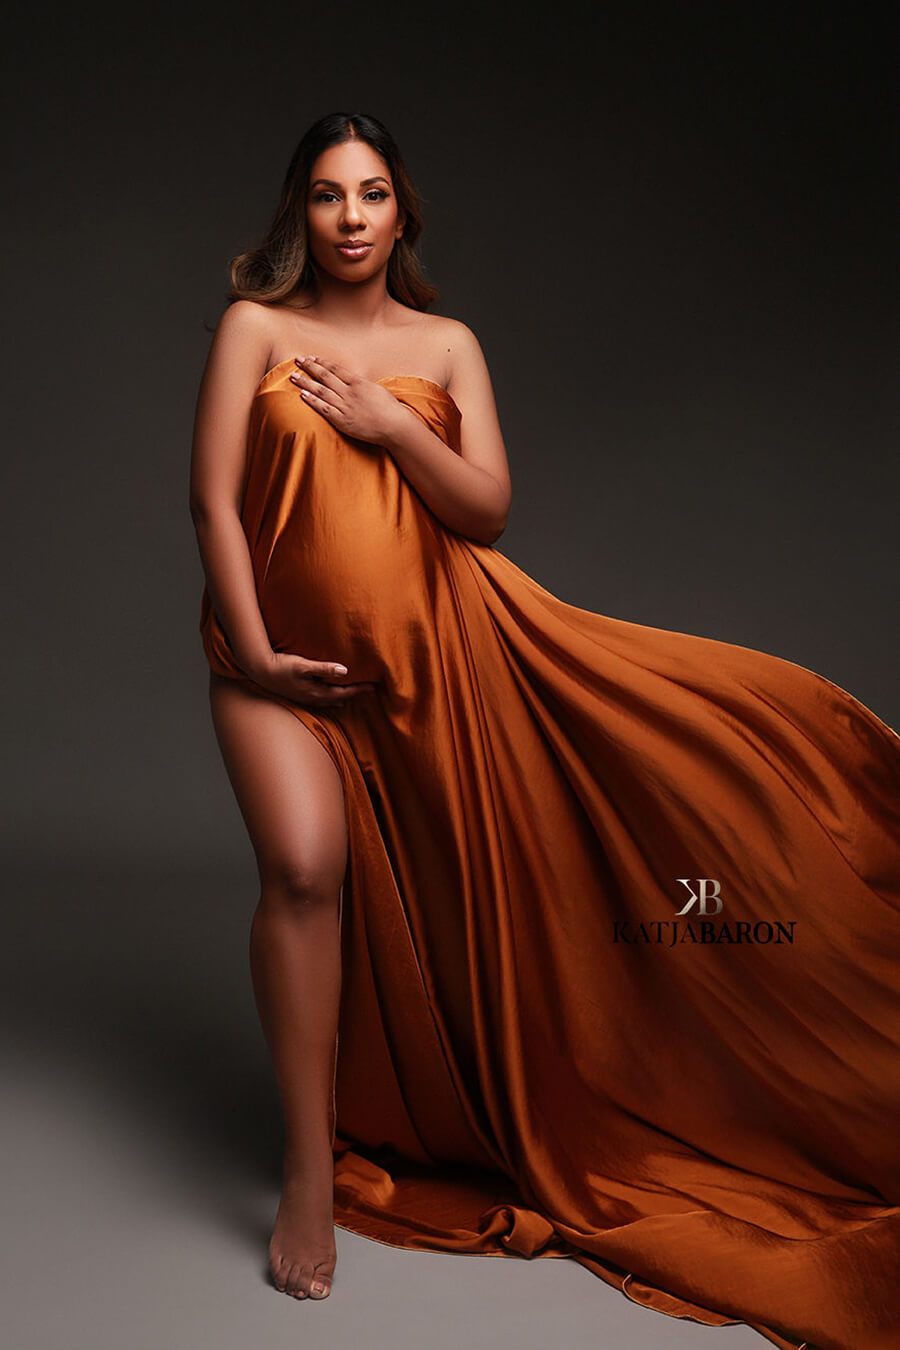 Pregnant model poses in a studio wearing a draping fabric in cognac color. the scarf covers her breast and belly.